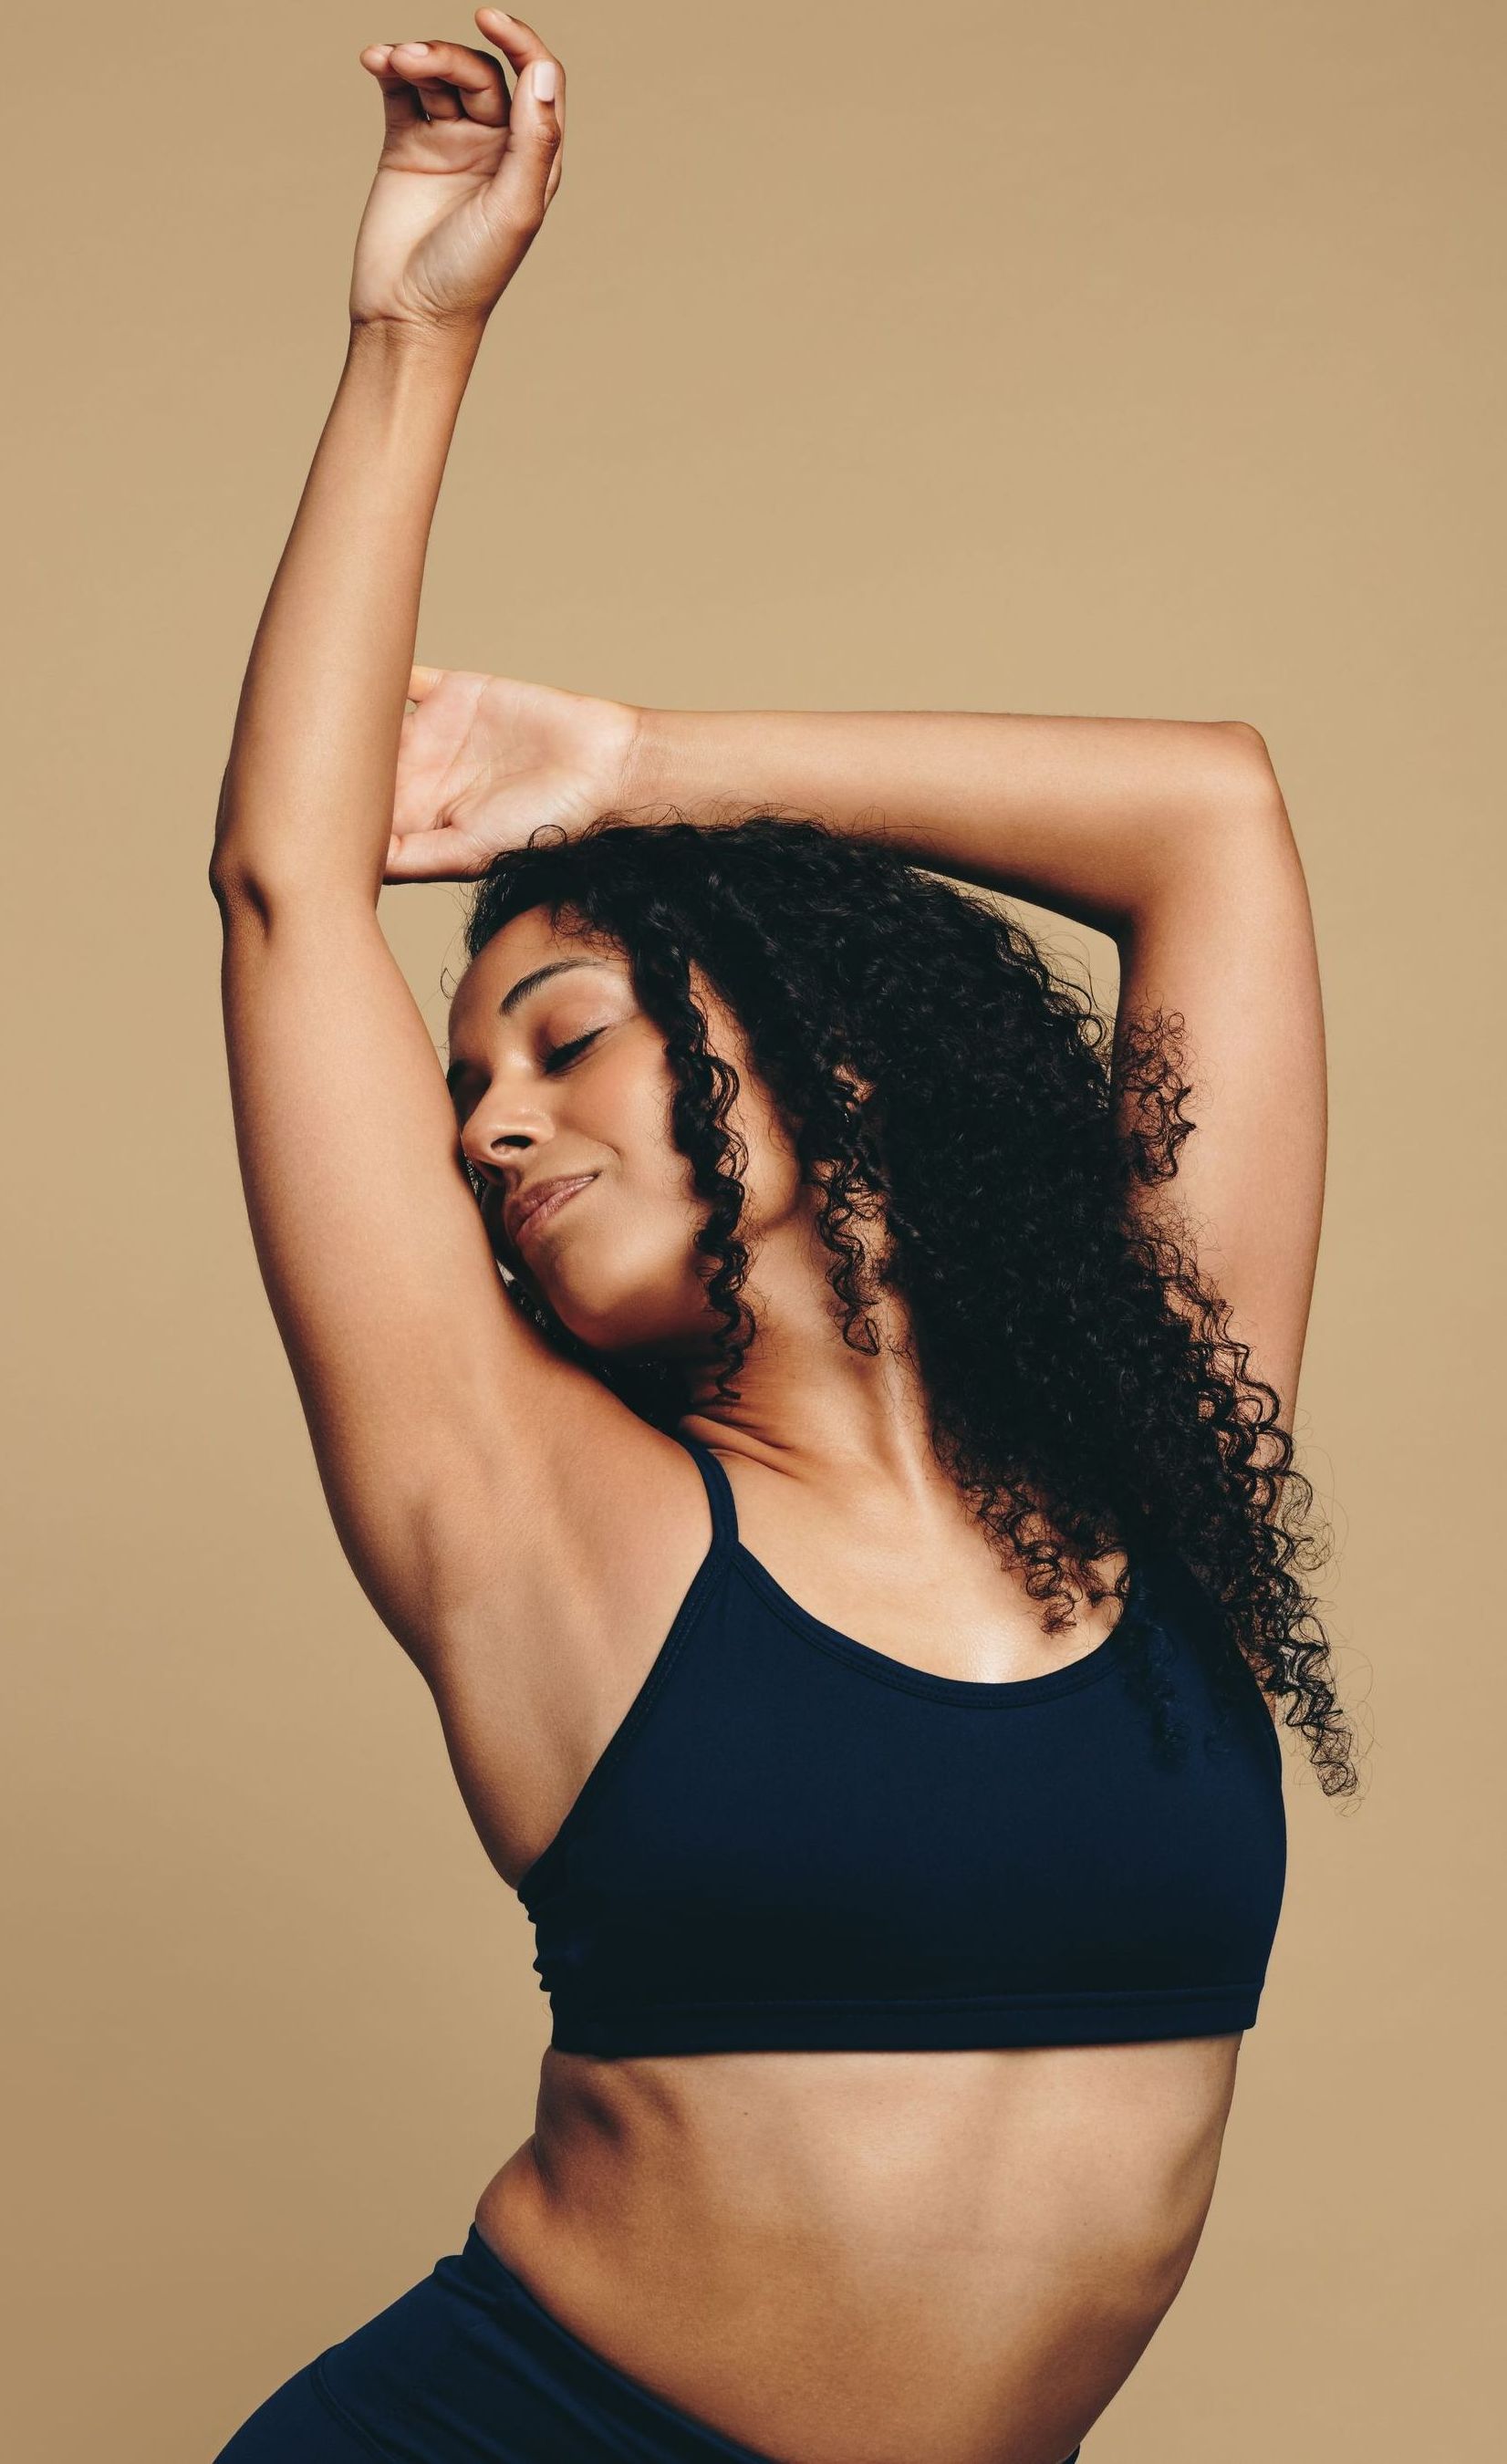 A woman with curly hair is dancing with her arms in the air.